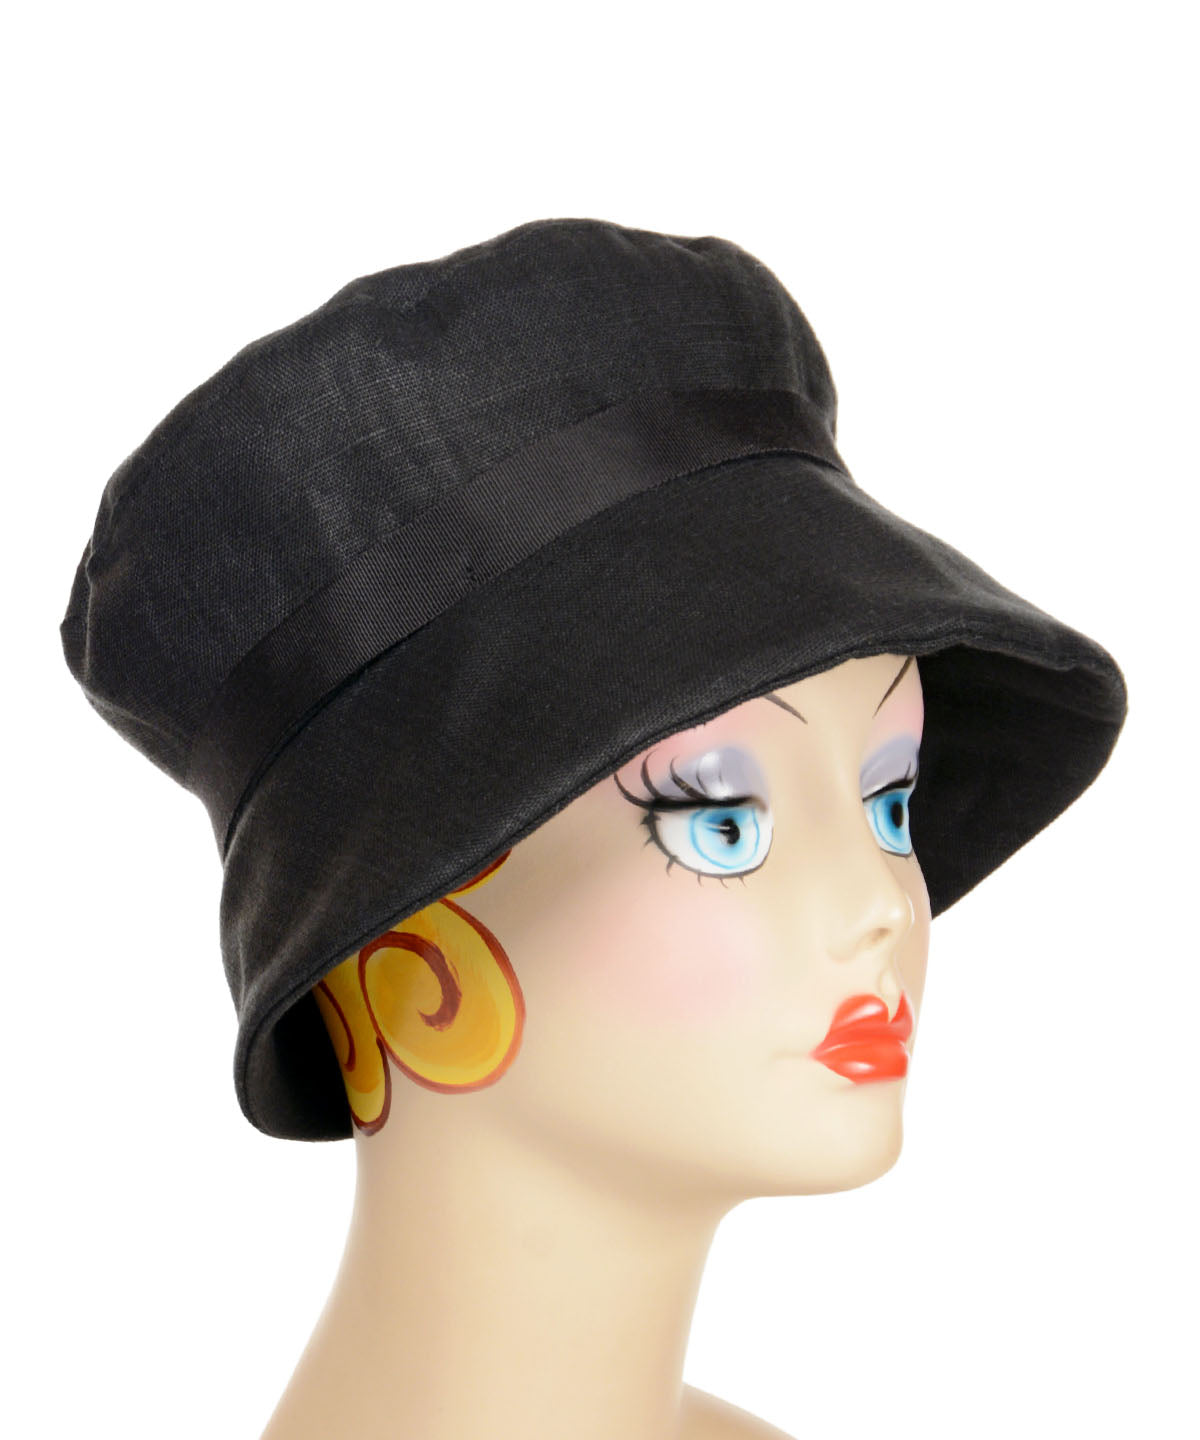 Molly Hat in Linen in Black with Black grosgrain Band by Pandemonium Seattle. Handmade in Seattle, WA USA.